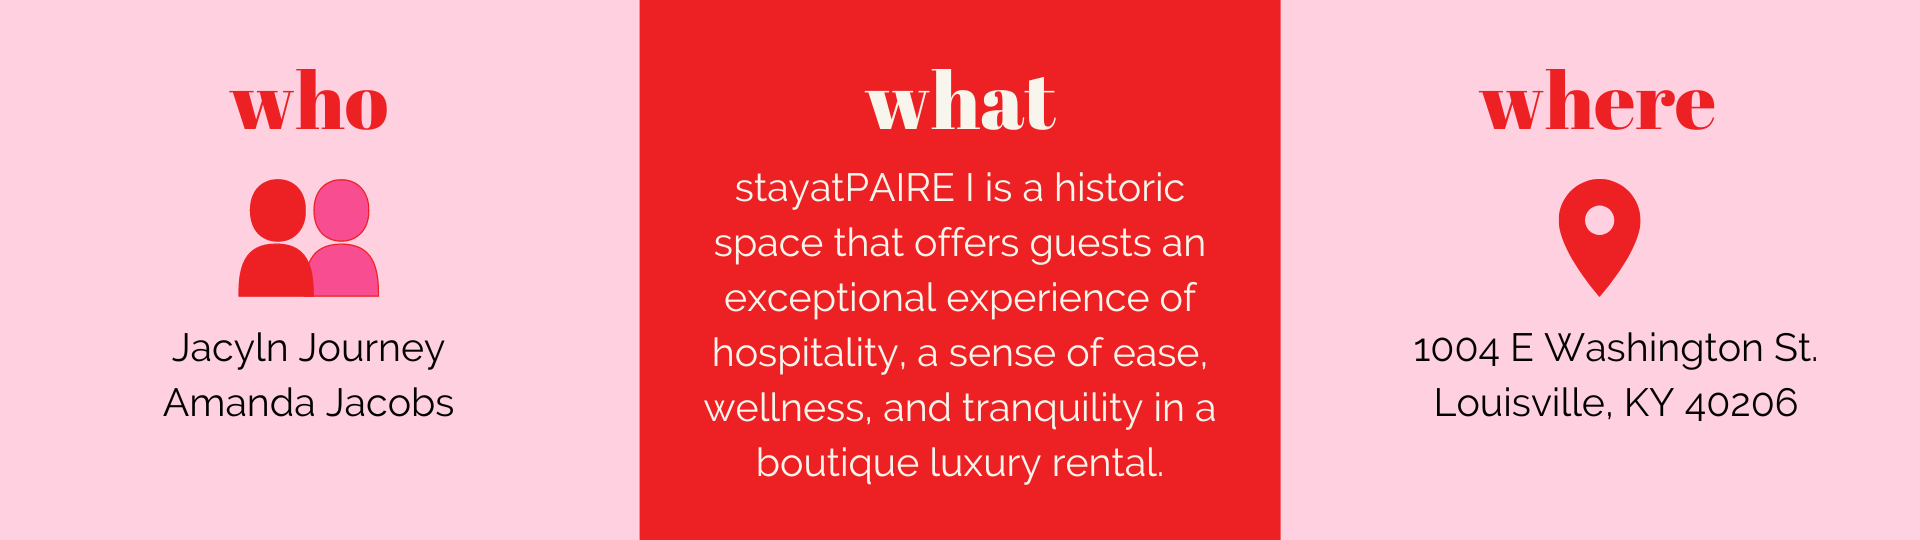 Text graphic that states the owner's names of stayatPAIRE I, Amanda Jacobs and Jaclyn Journey, a short bio of the rental, and the rental's address/location in Nulu.